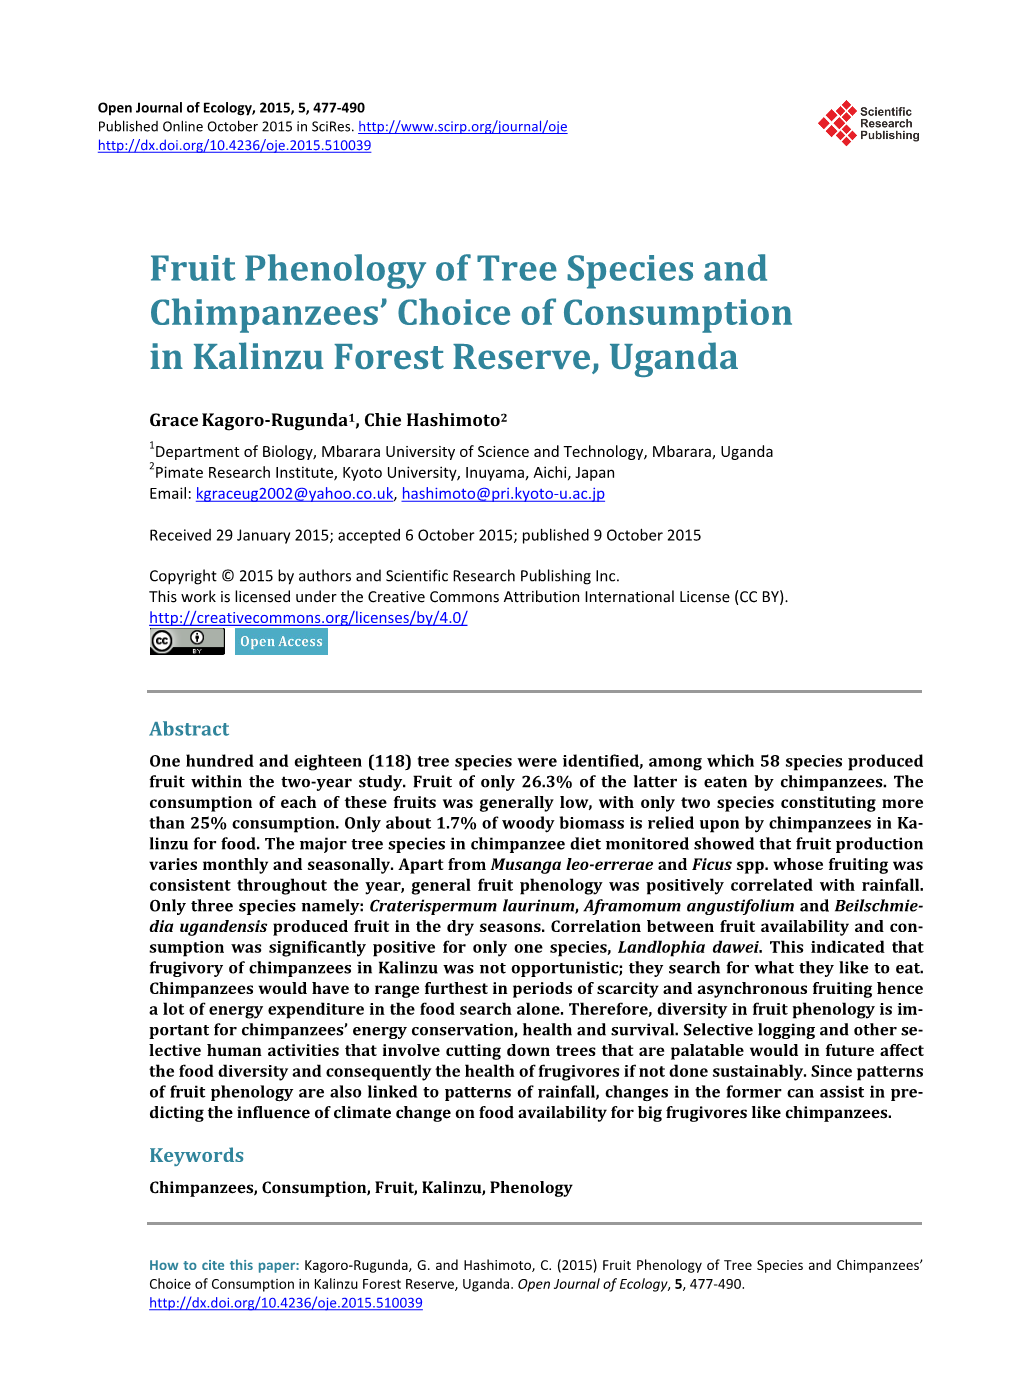 Fruit Phenology of Tree Species and Chimpanzees' Choice Of